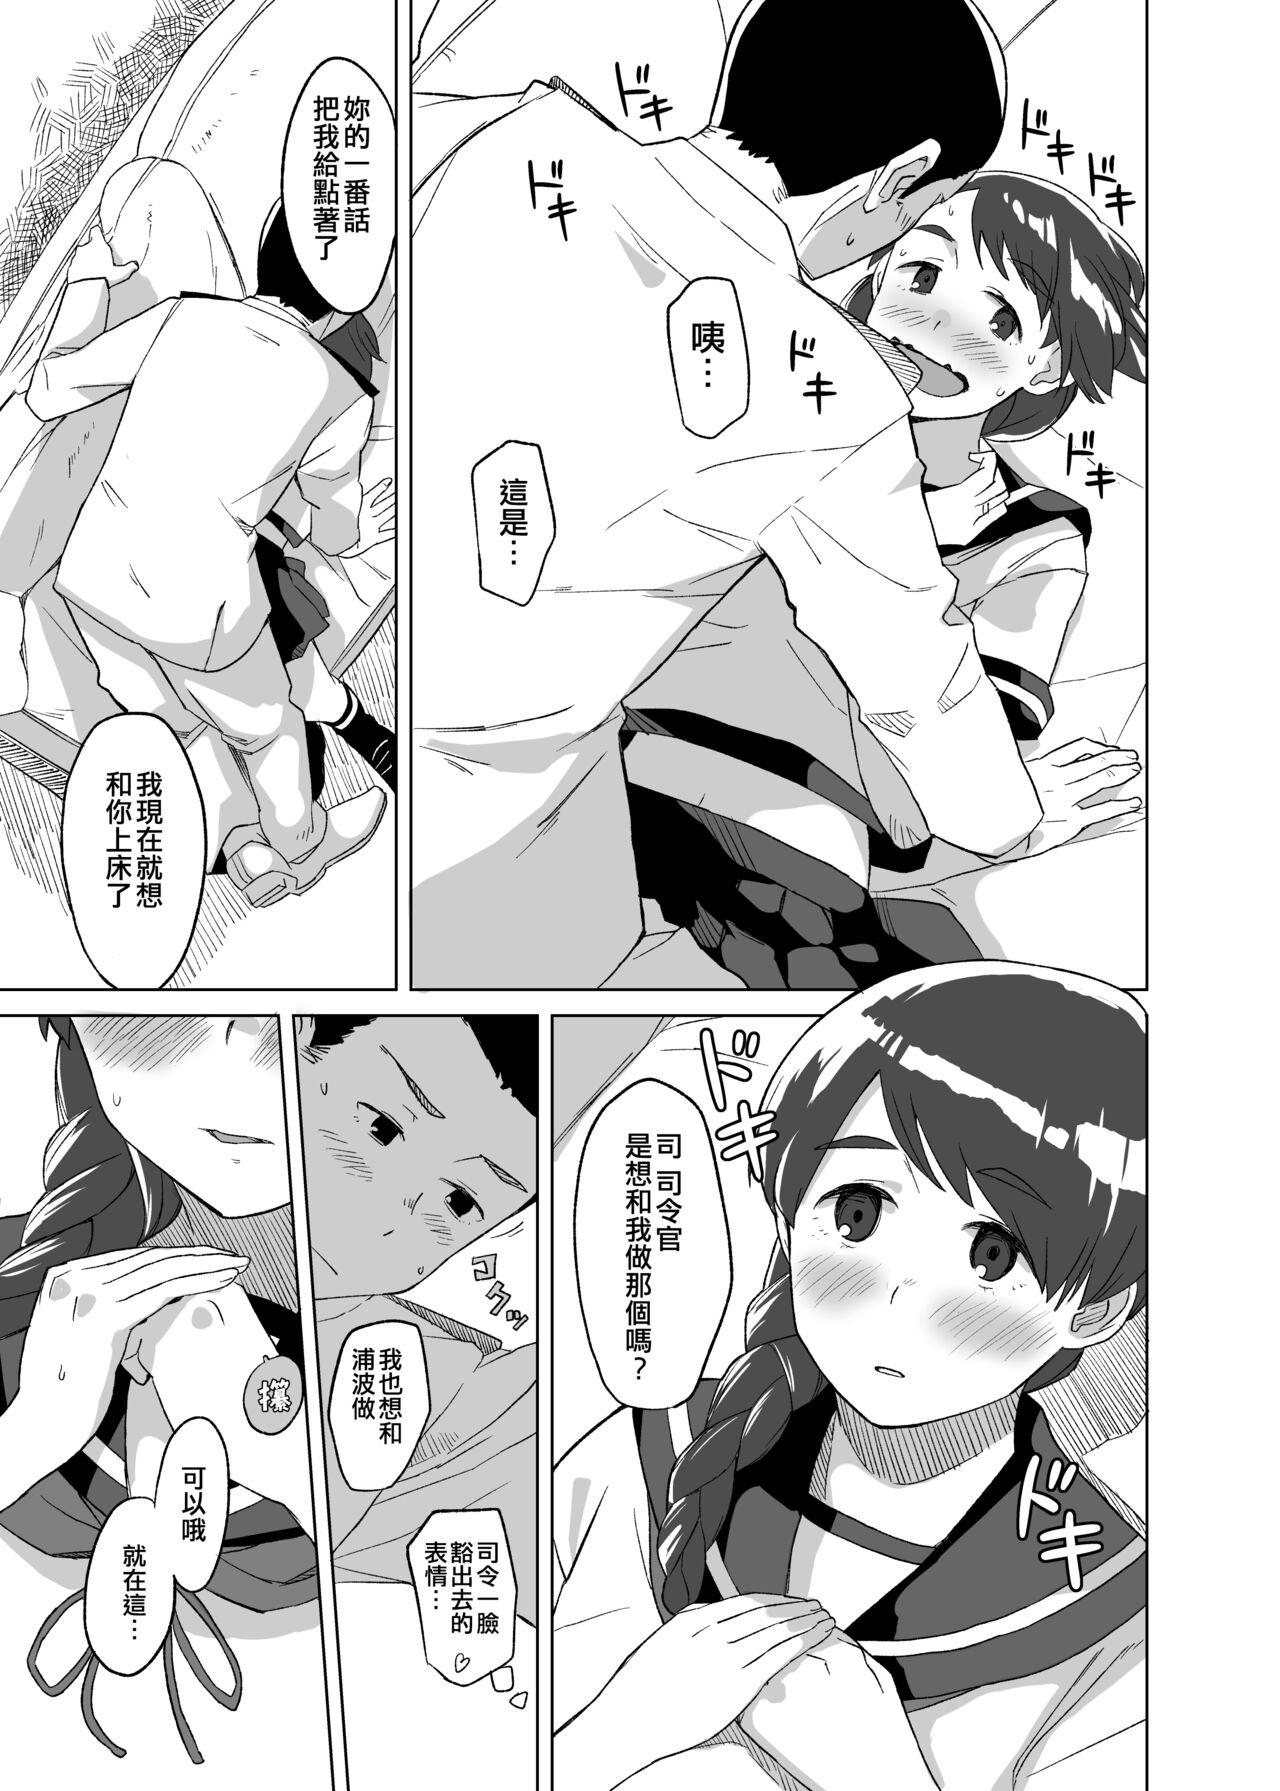 Mouth Ding Dong - Kantai collection Brazzers - Page 7